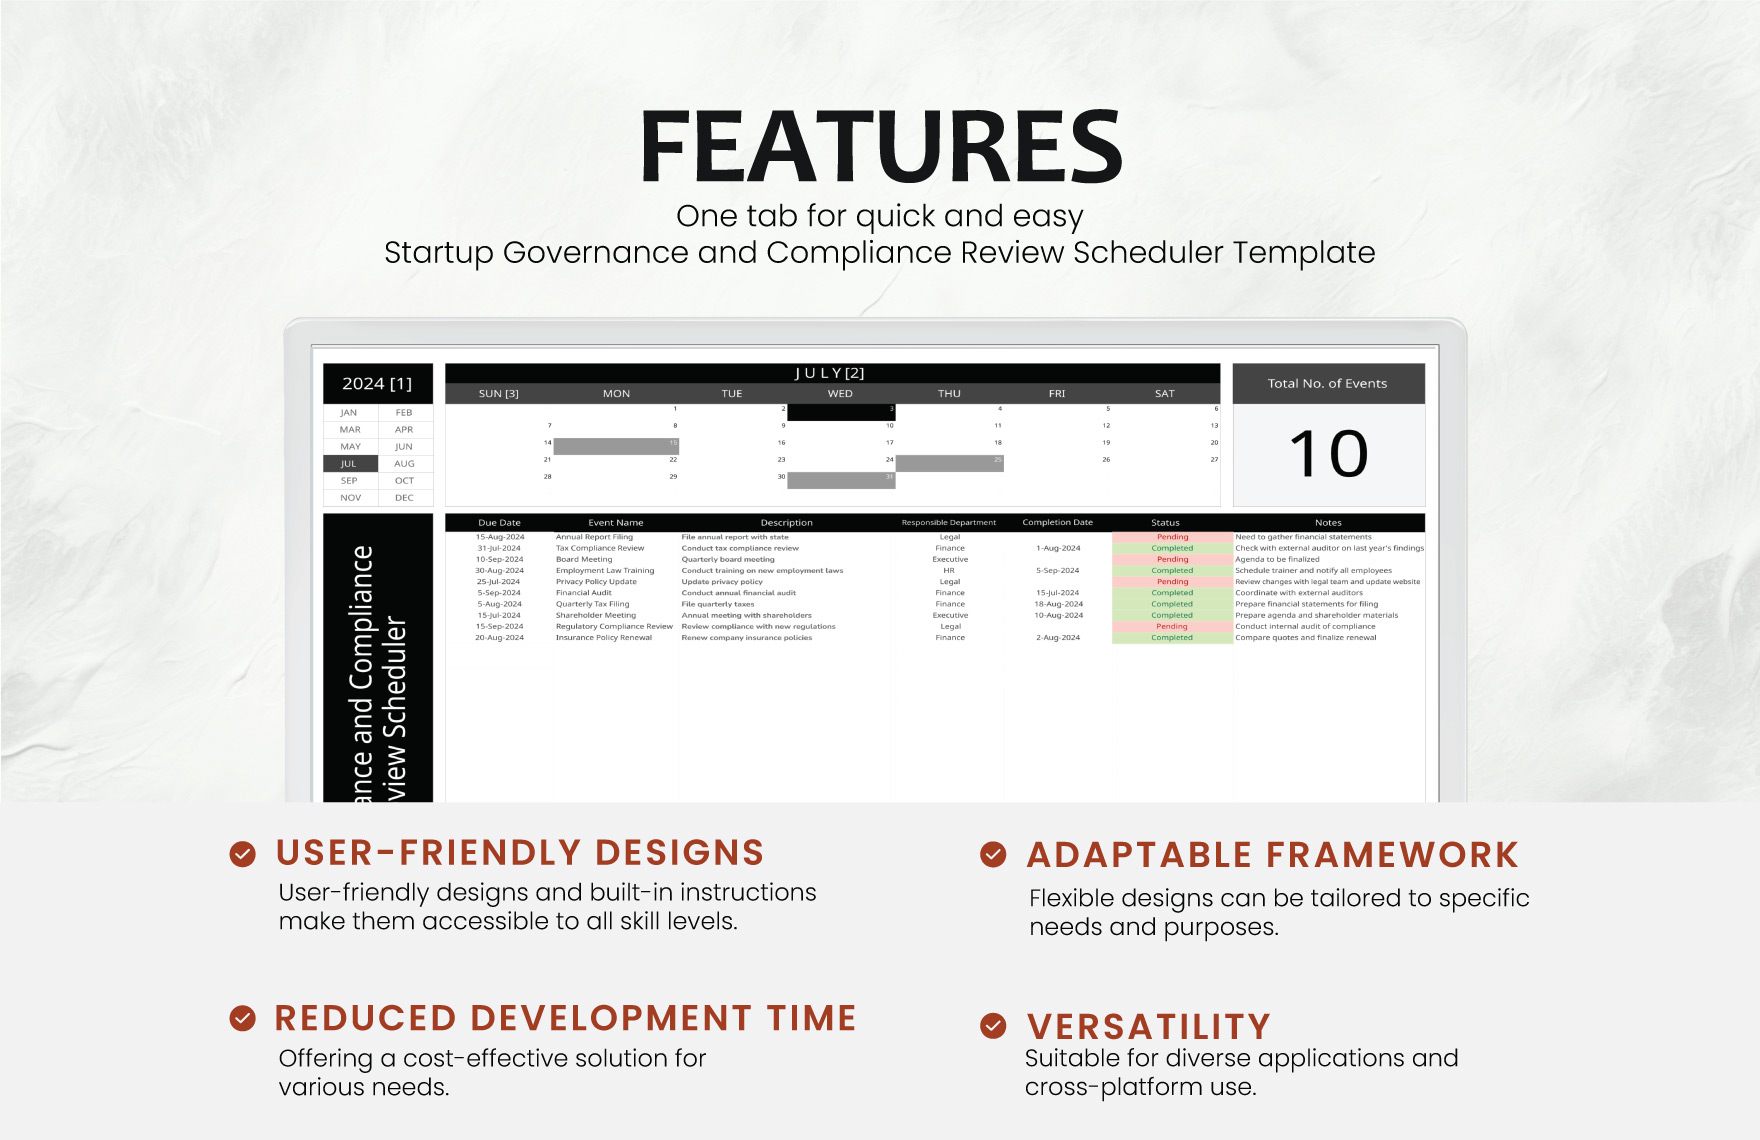 Startup Governance and Compliance Review Scheduler Template